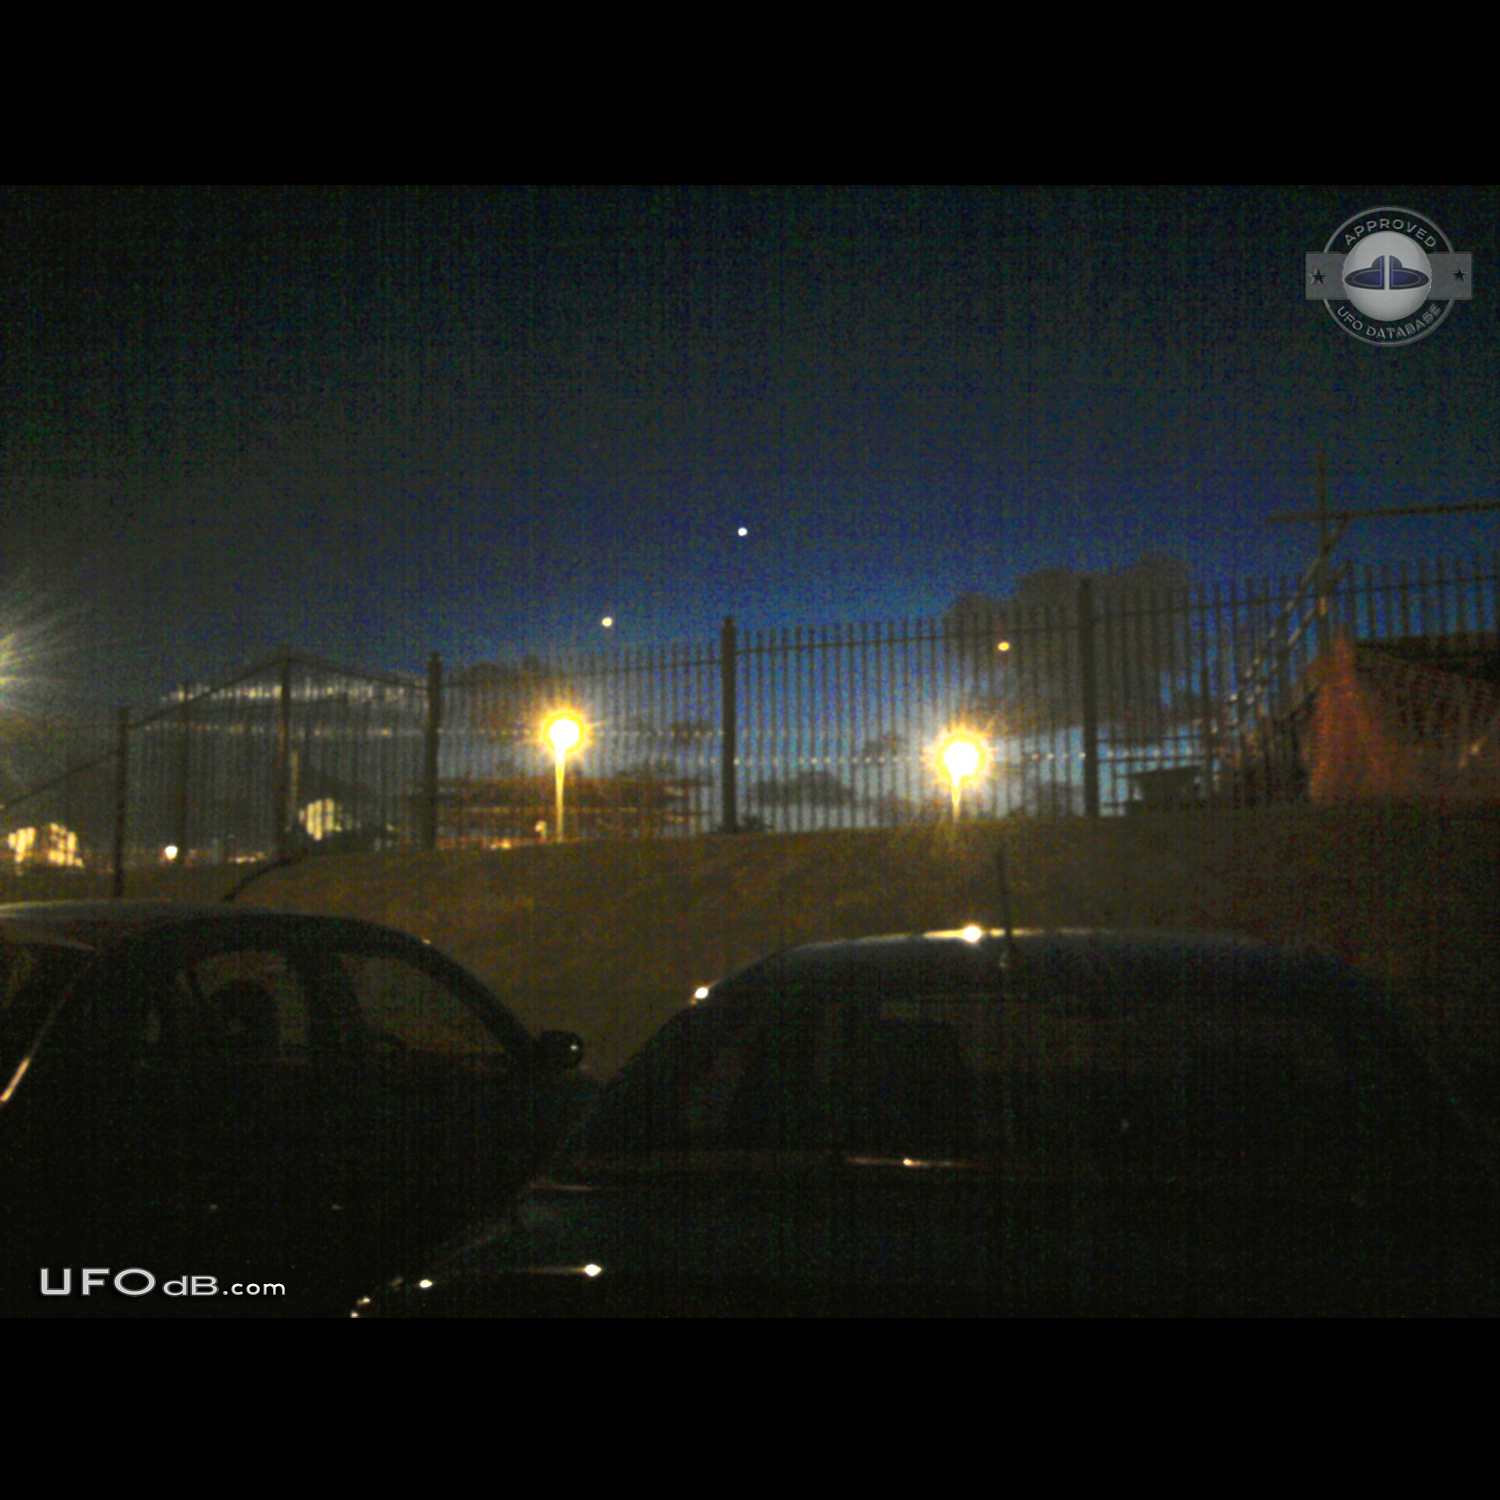 UFO sightings happen in many occasion over Liverpool, England - 2012 UFO Picture #451-3